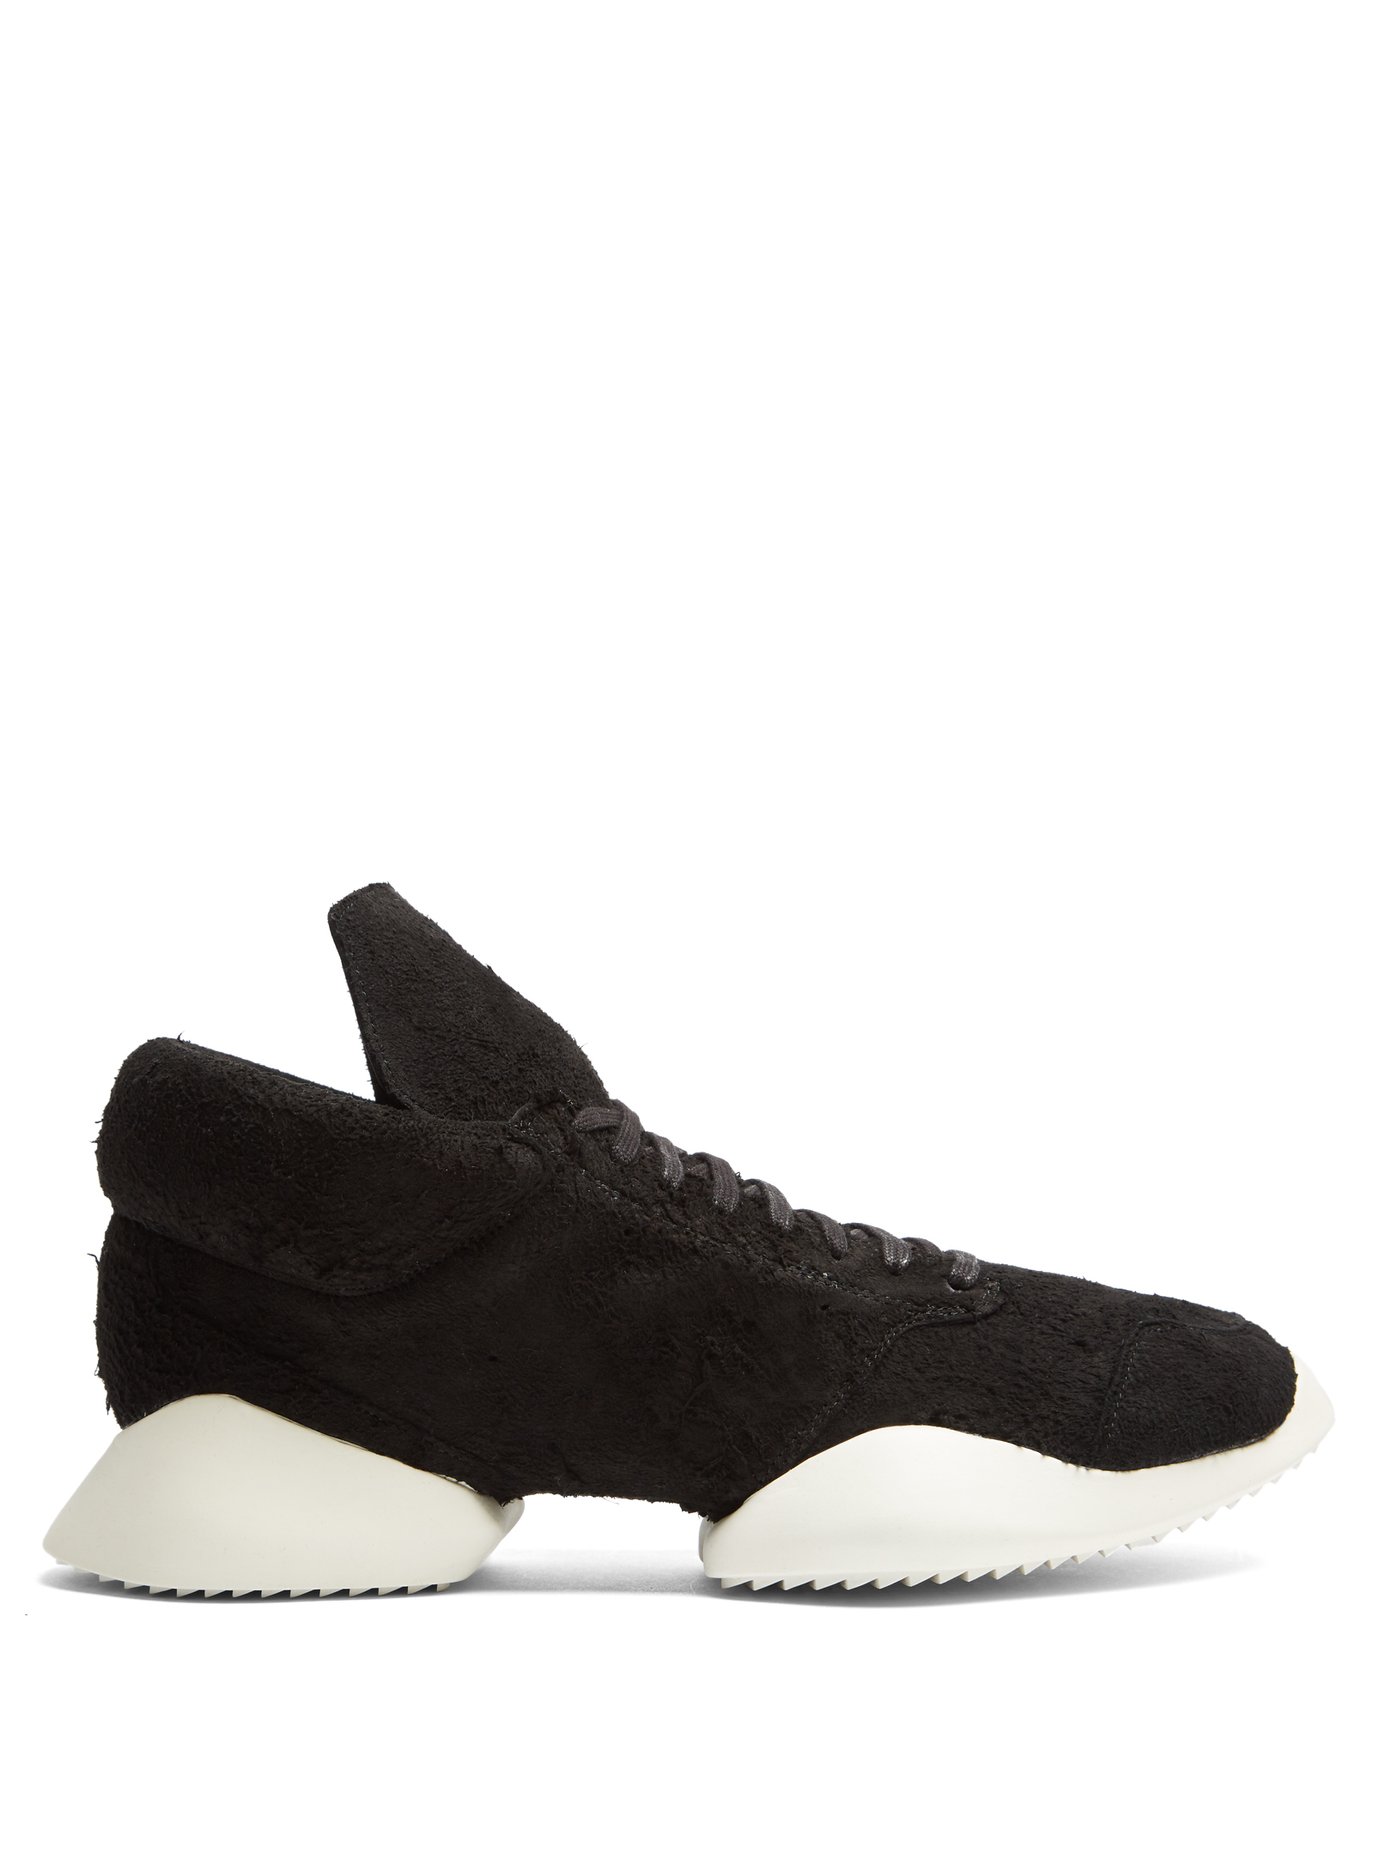 X Adidas Vicious Runner low-top suede 